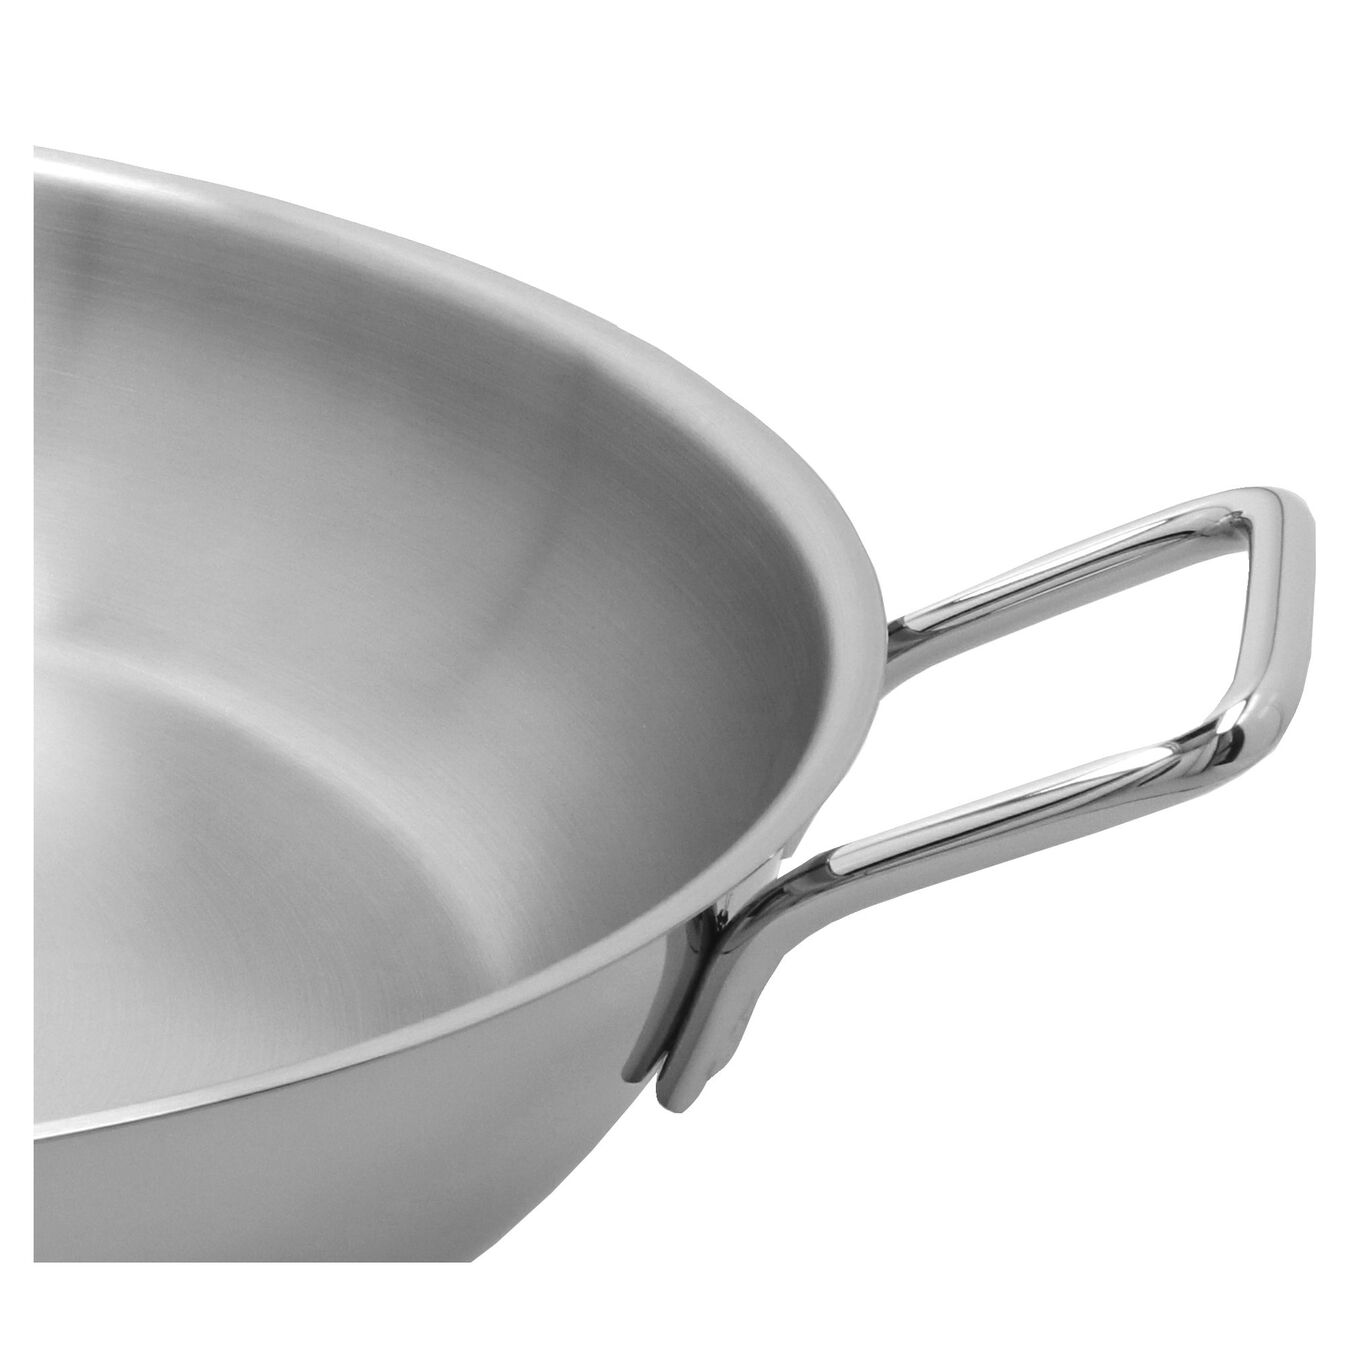 18-inch, Paella pan without lid, silver,,large 5